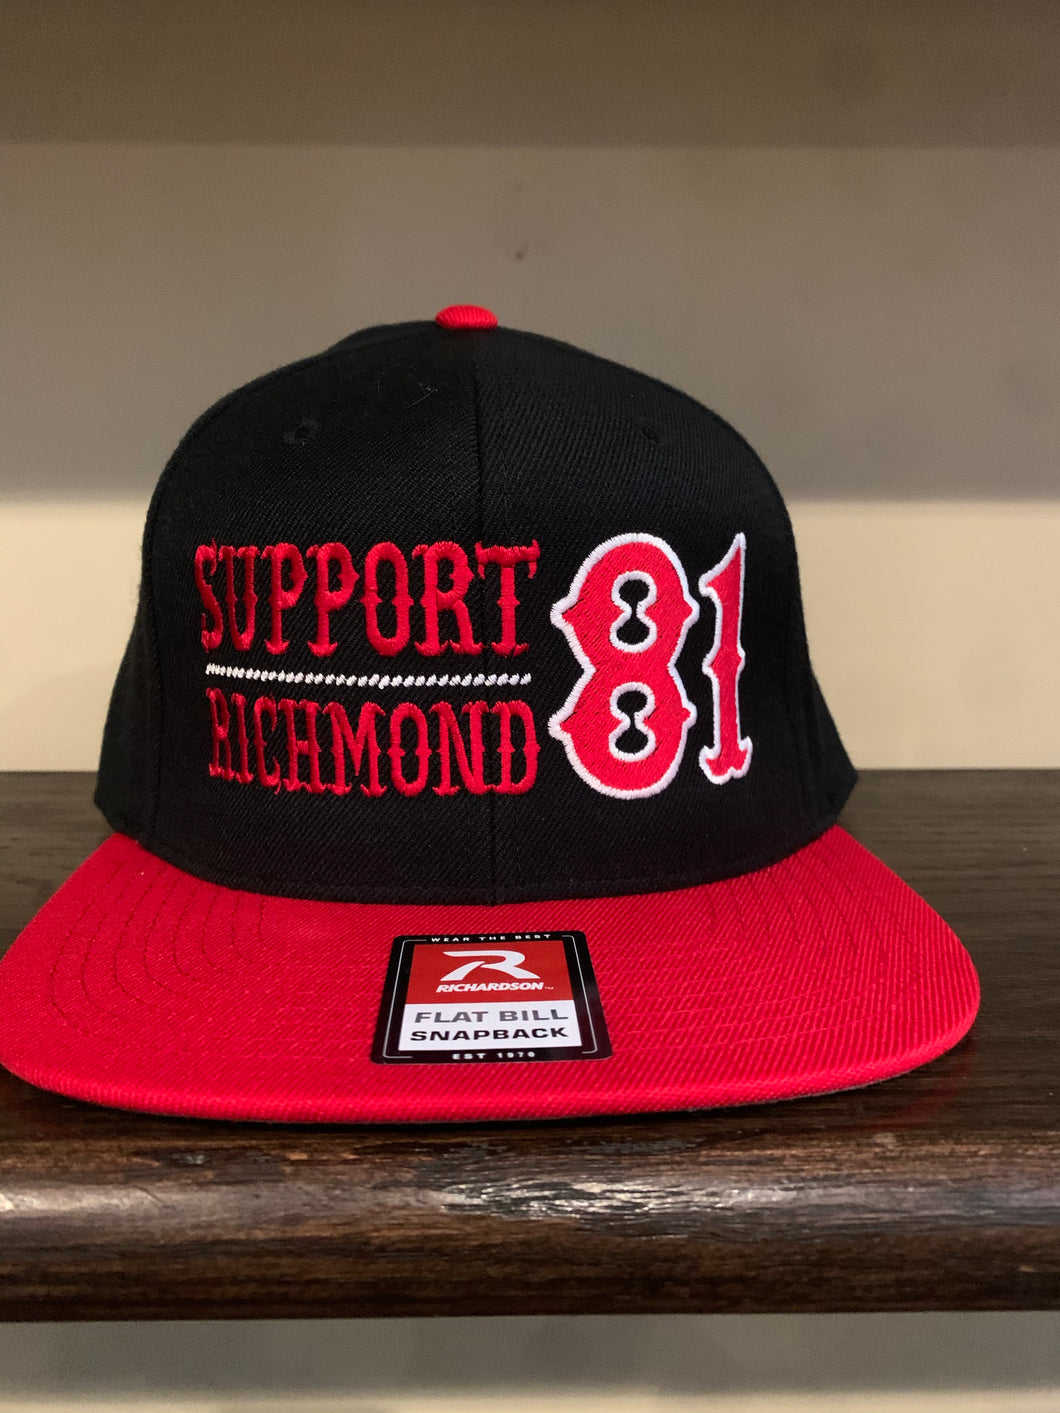 Black SnapBack with red bill